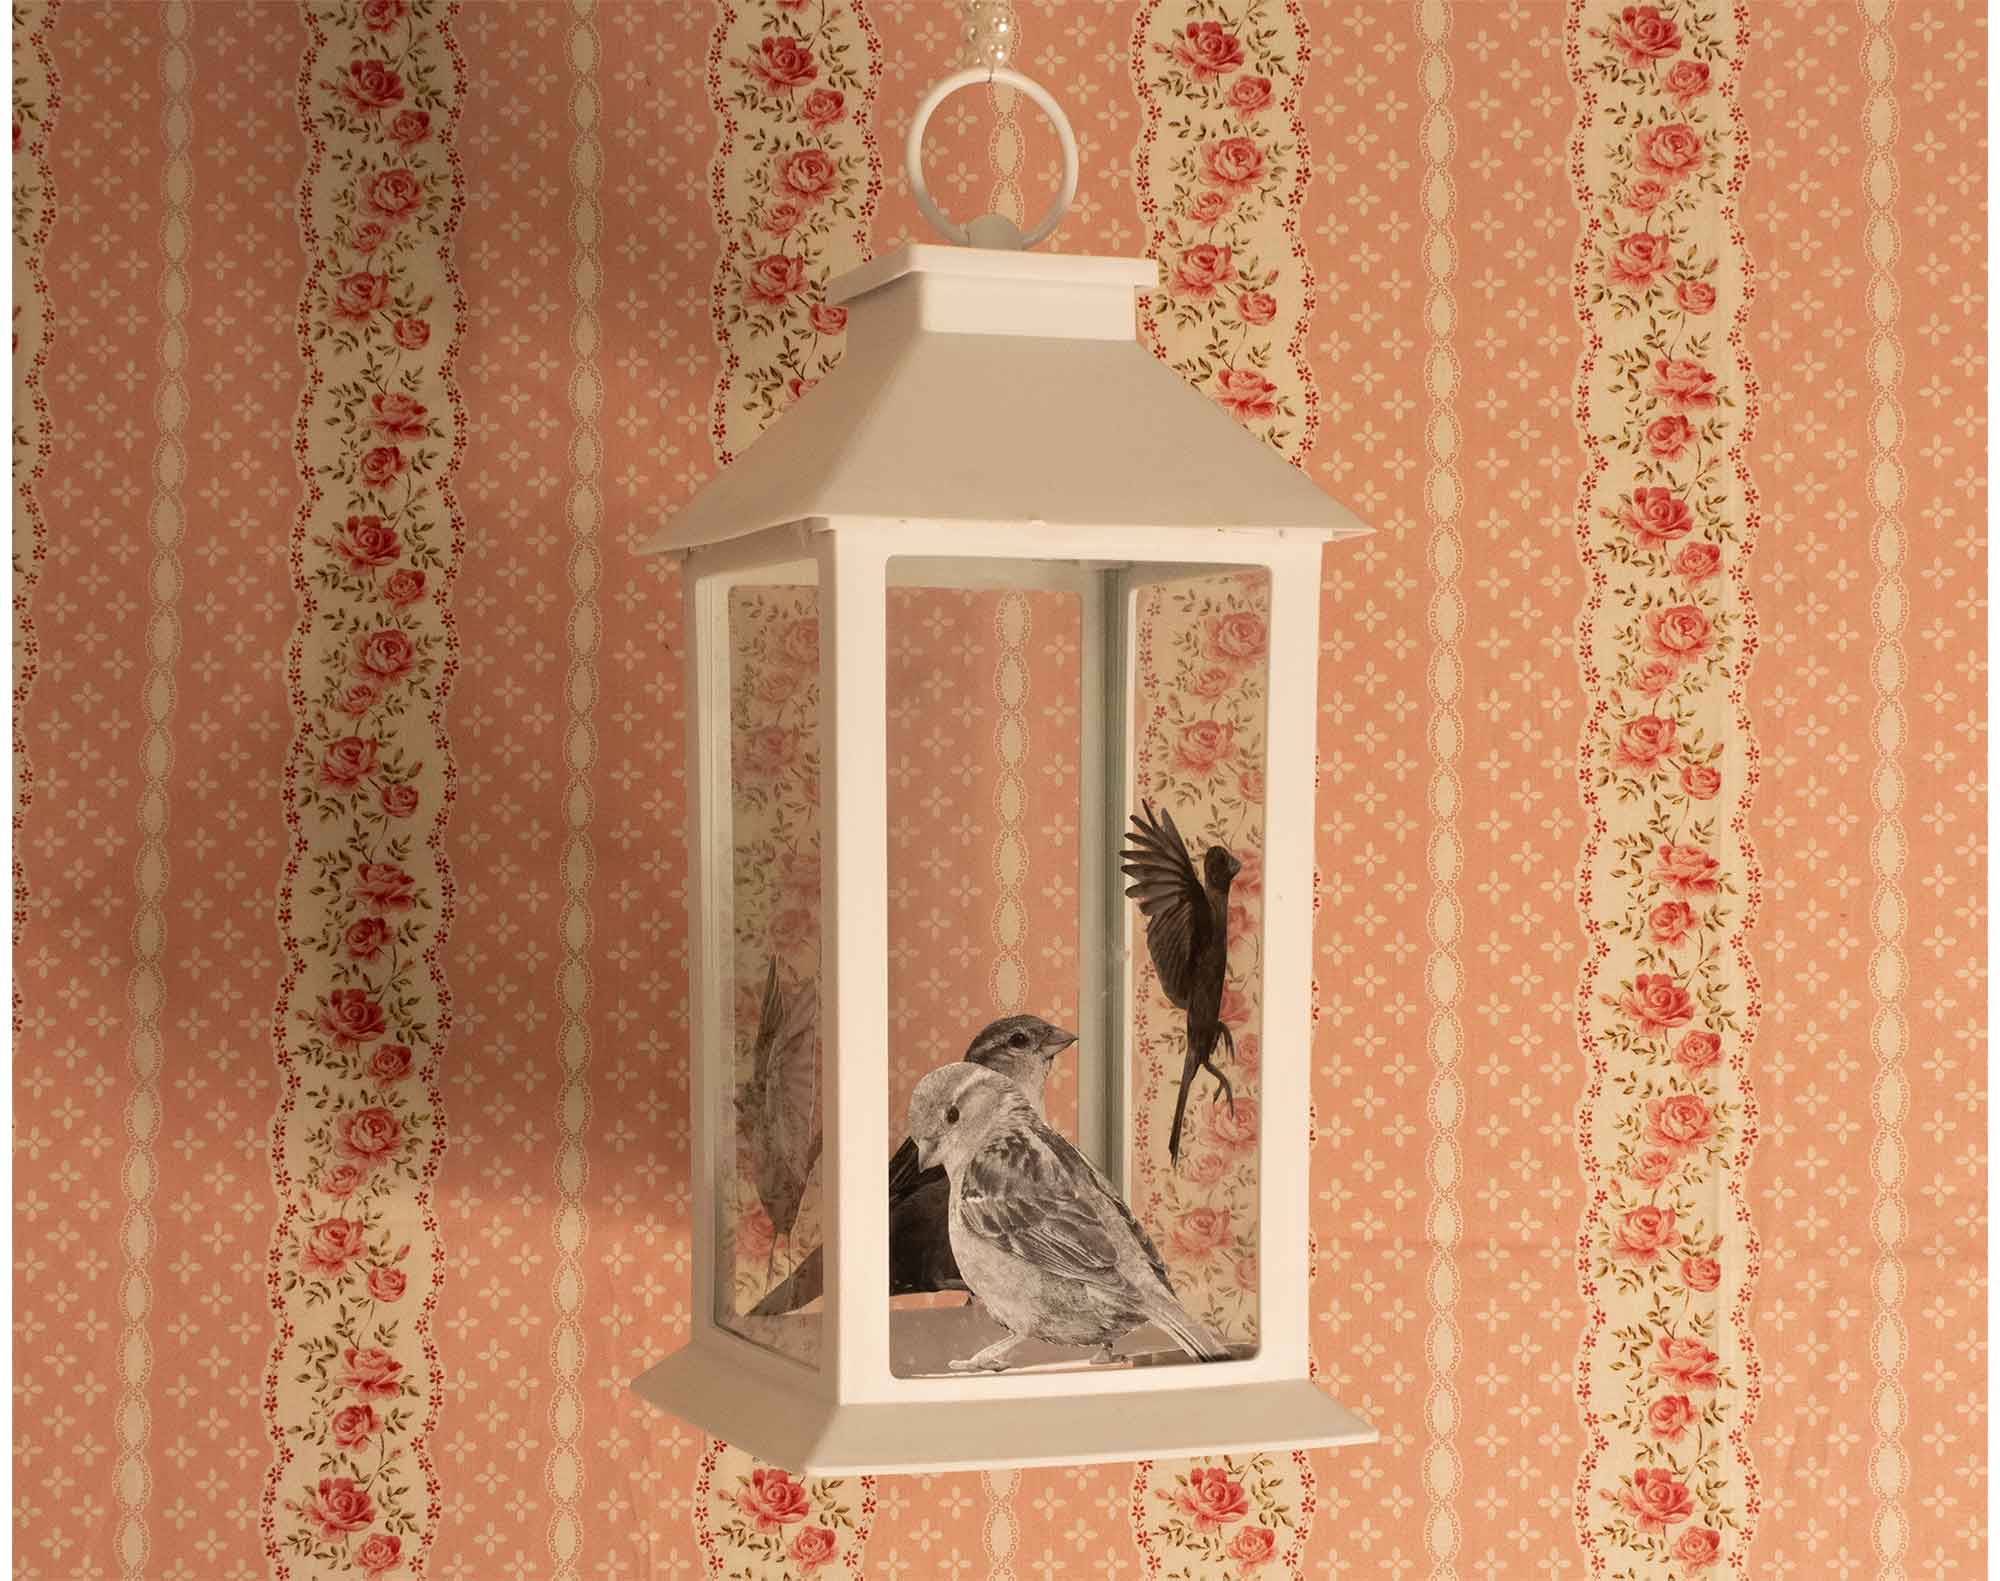 Black and white paper birds pasted inside each panel of a white plastic lantern hanging in front of a pink striped flower pattern.